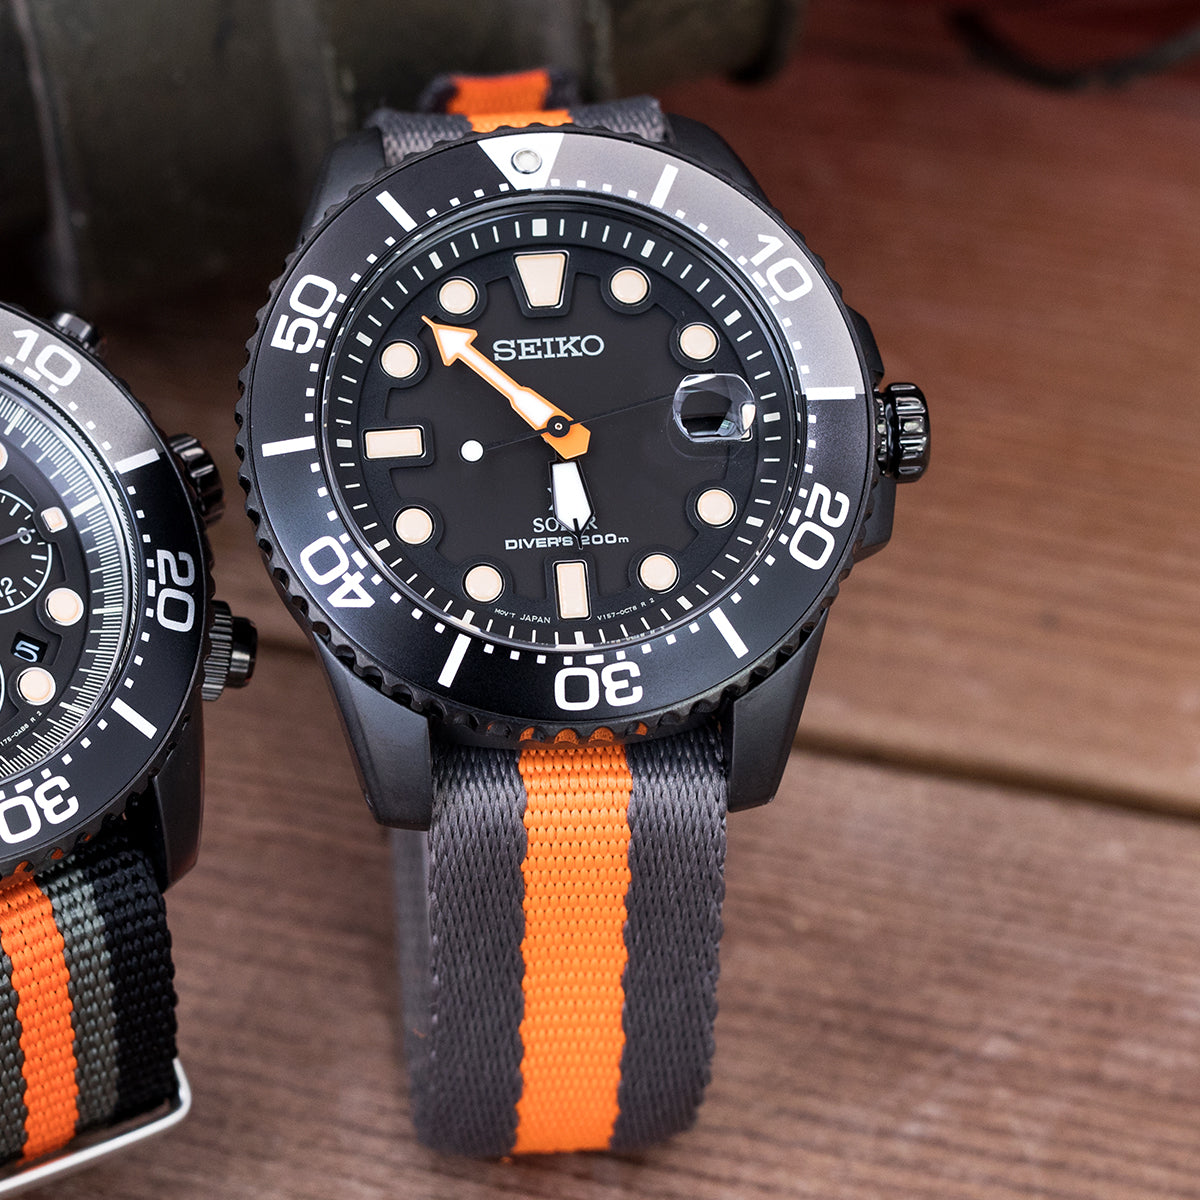 Nato watch straps from Strapcode